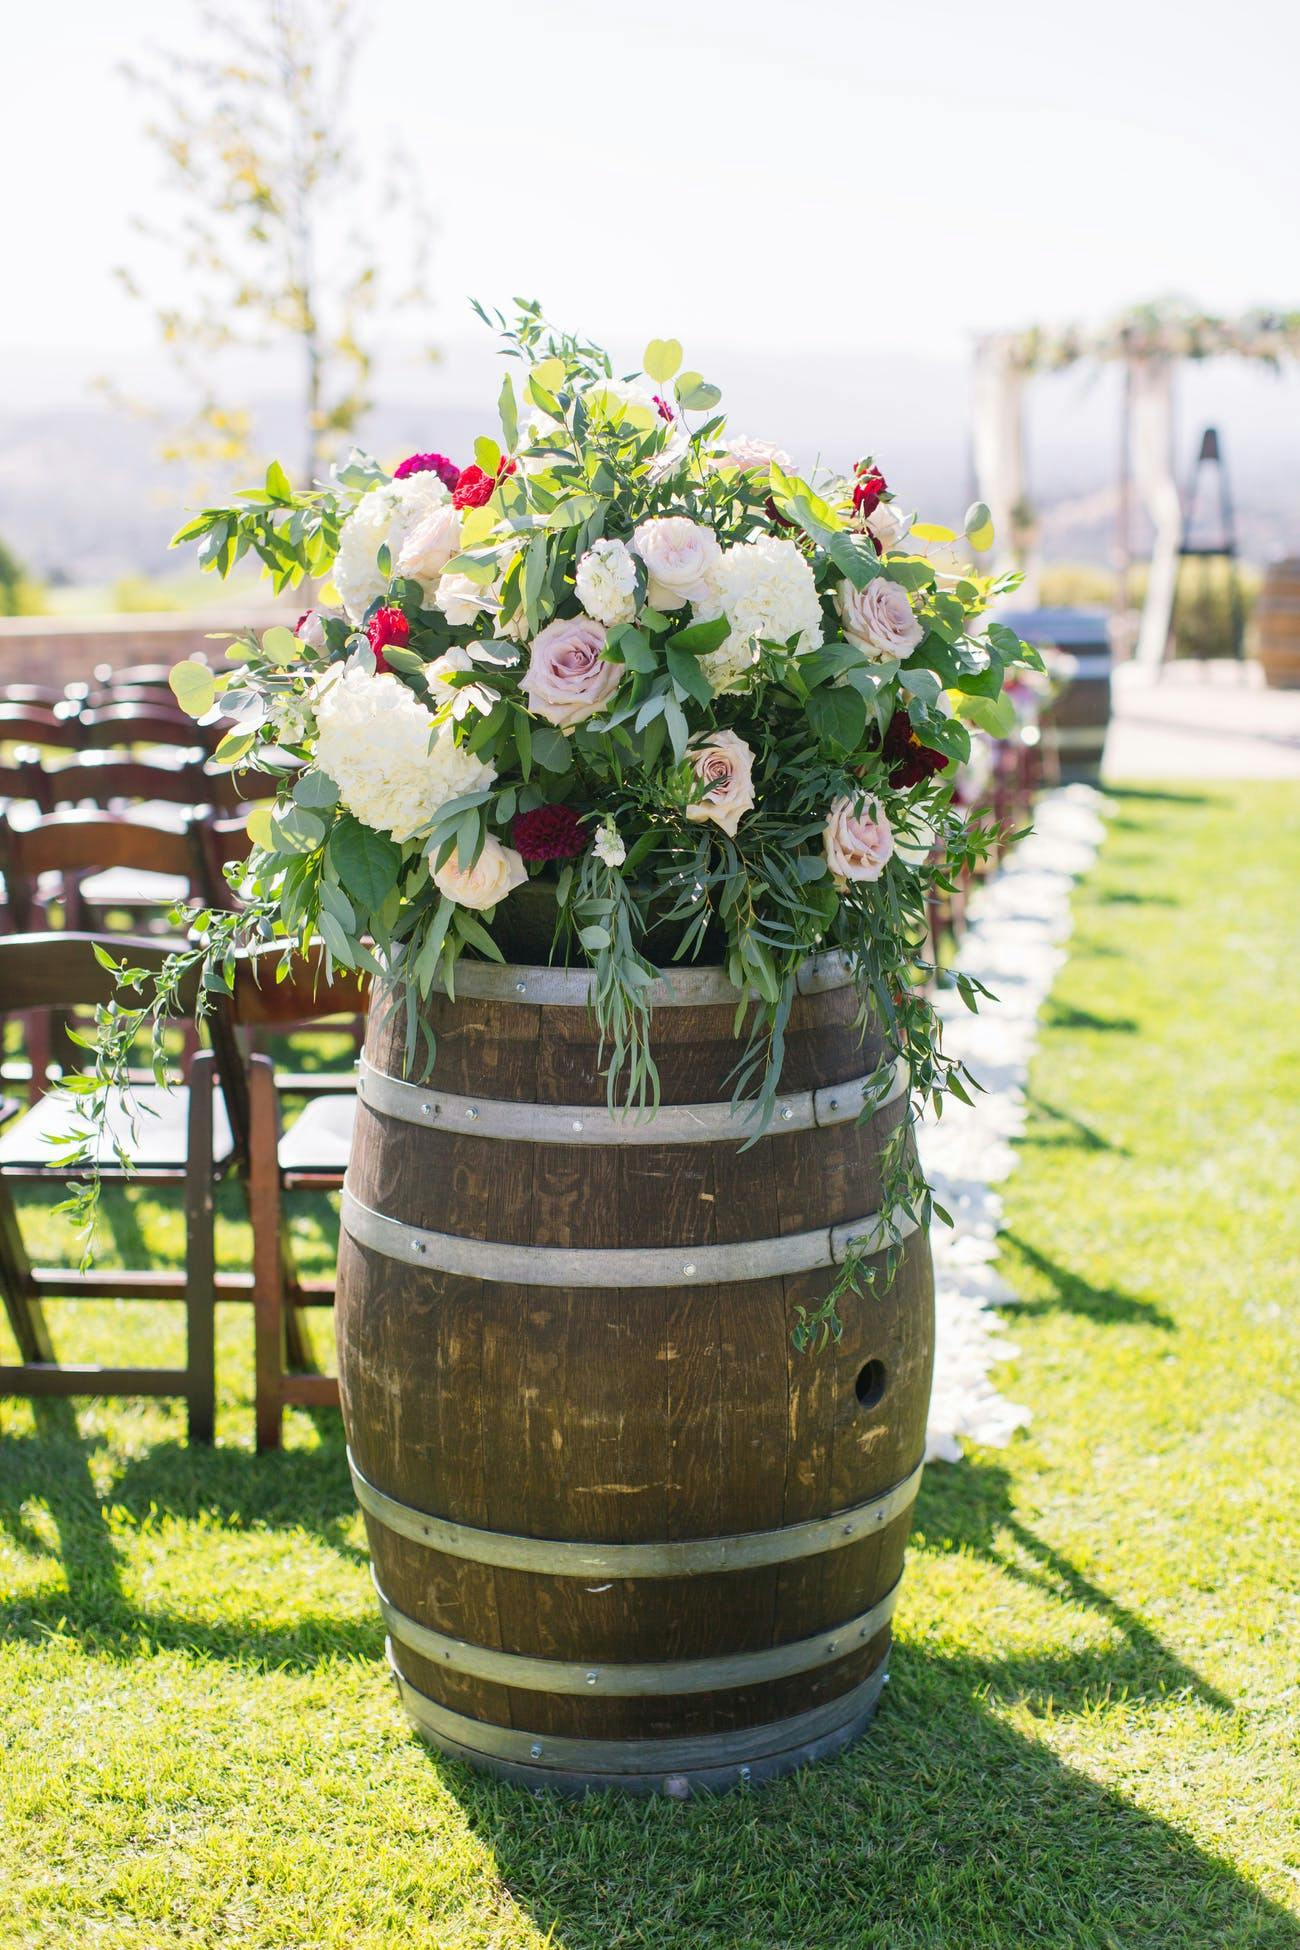 Rustic wedding aisle décor featuring a vintage wine barrel with flowers.